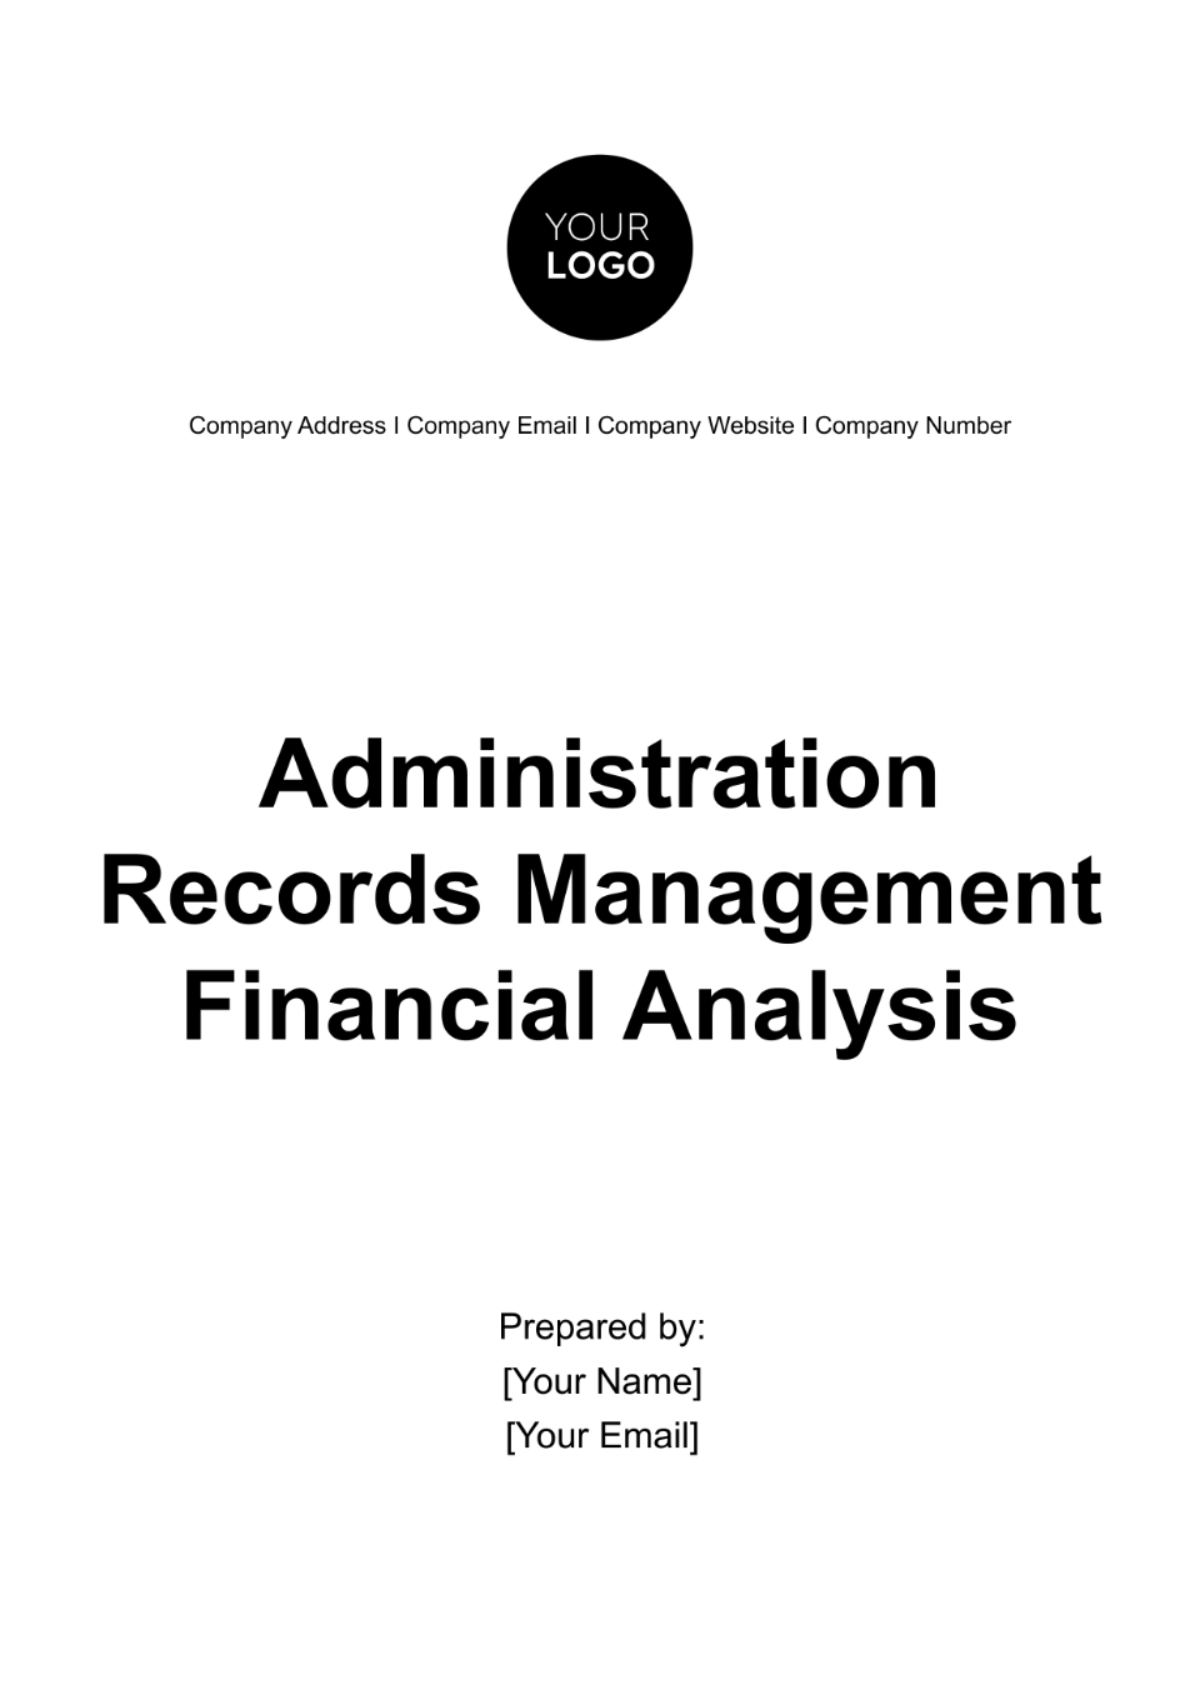 Administration Records Management Financial Analysis Template